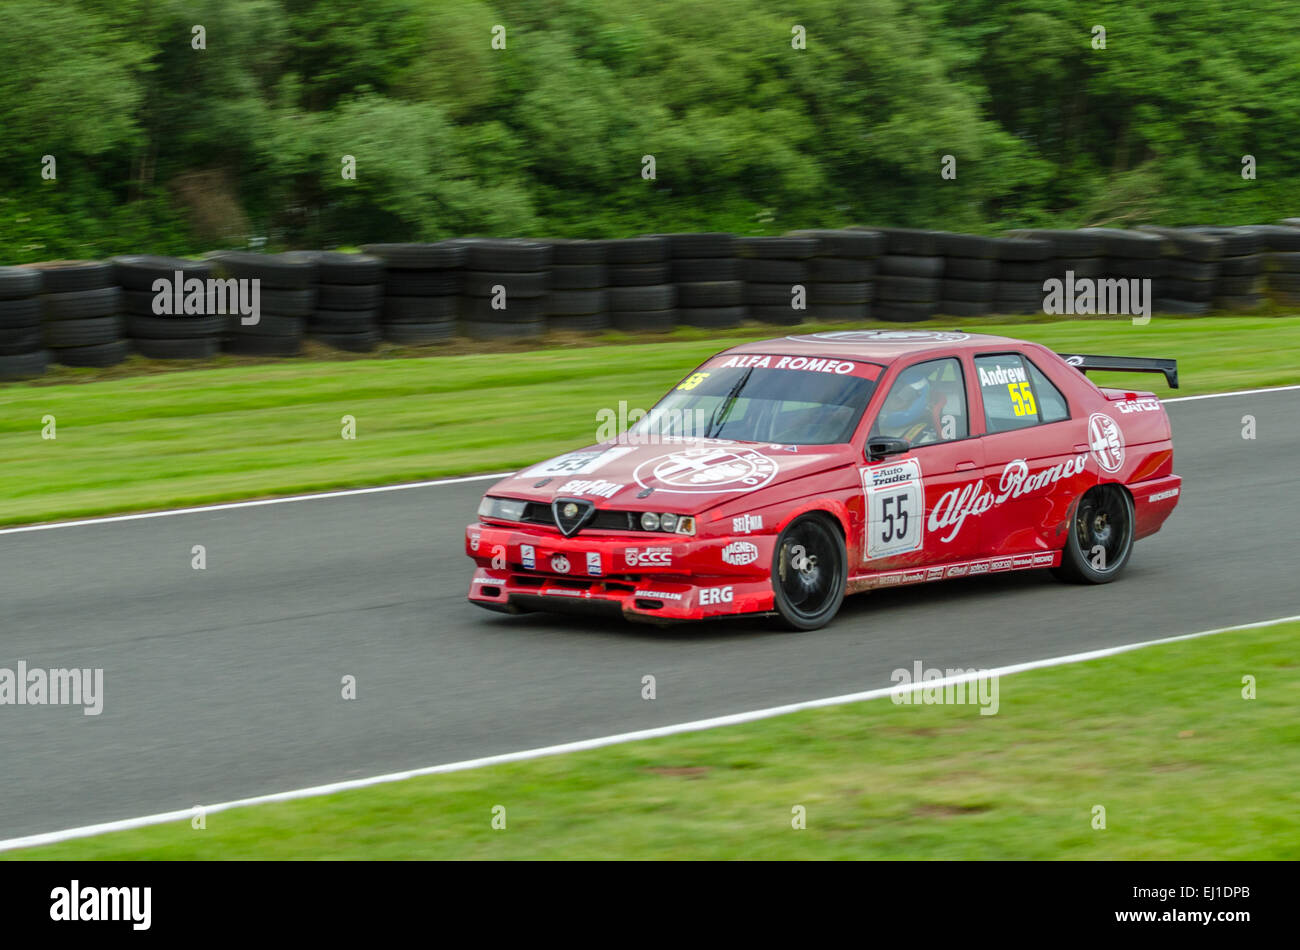 a classic alfa romeo competes in a classic touring cars race at oulton EJ1DPB